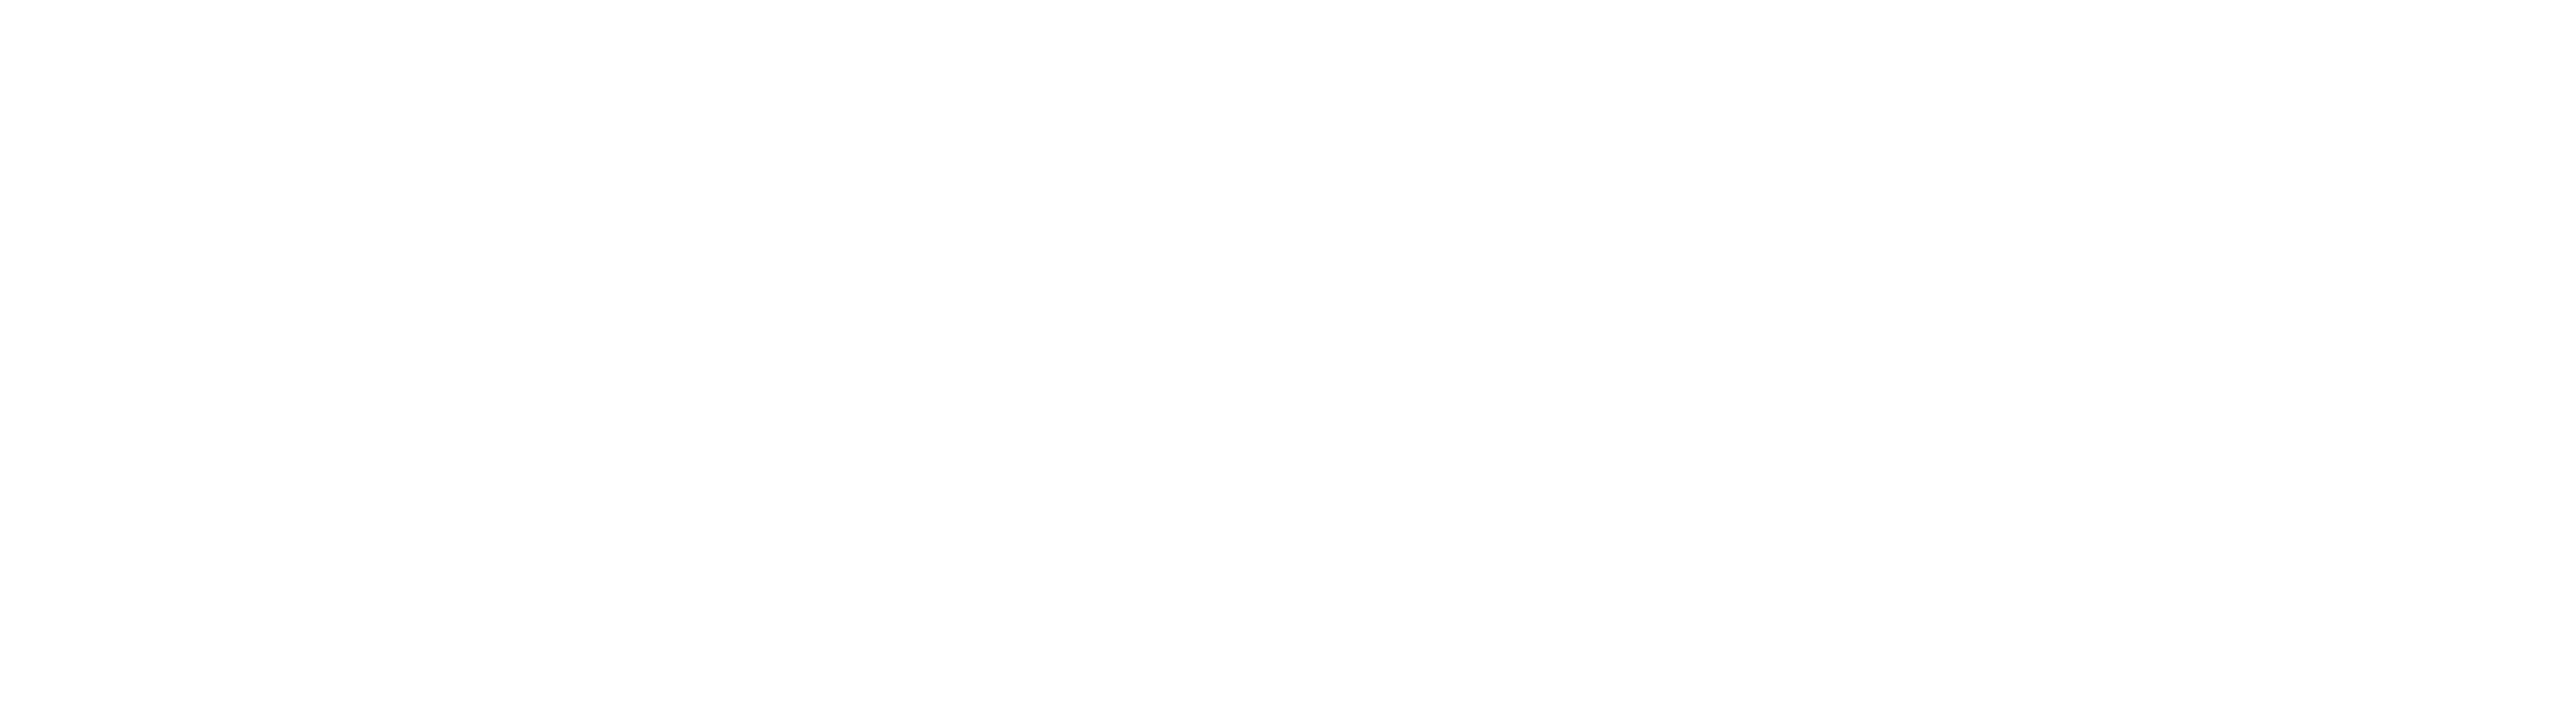 Goodway Group